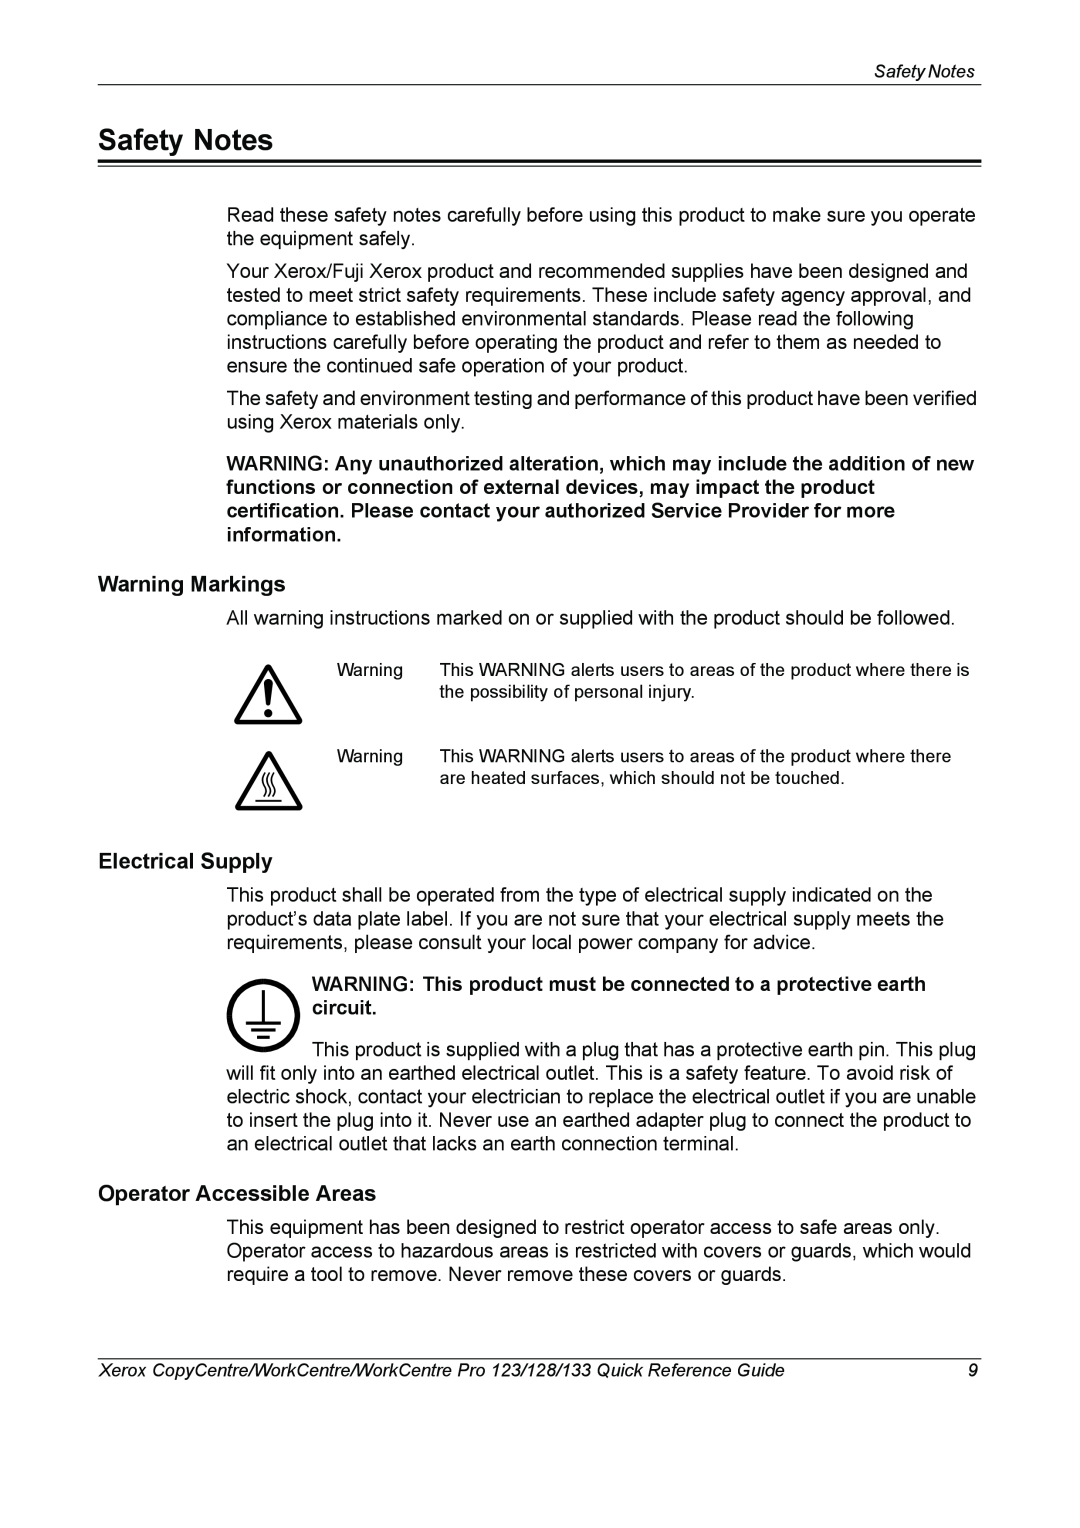 Xerox 604P18037 manual Safety Notes, Warning Markings, Electrical Supply, Operator Accessible Areas 